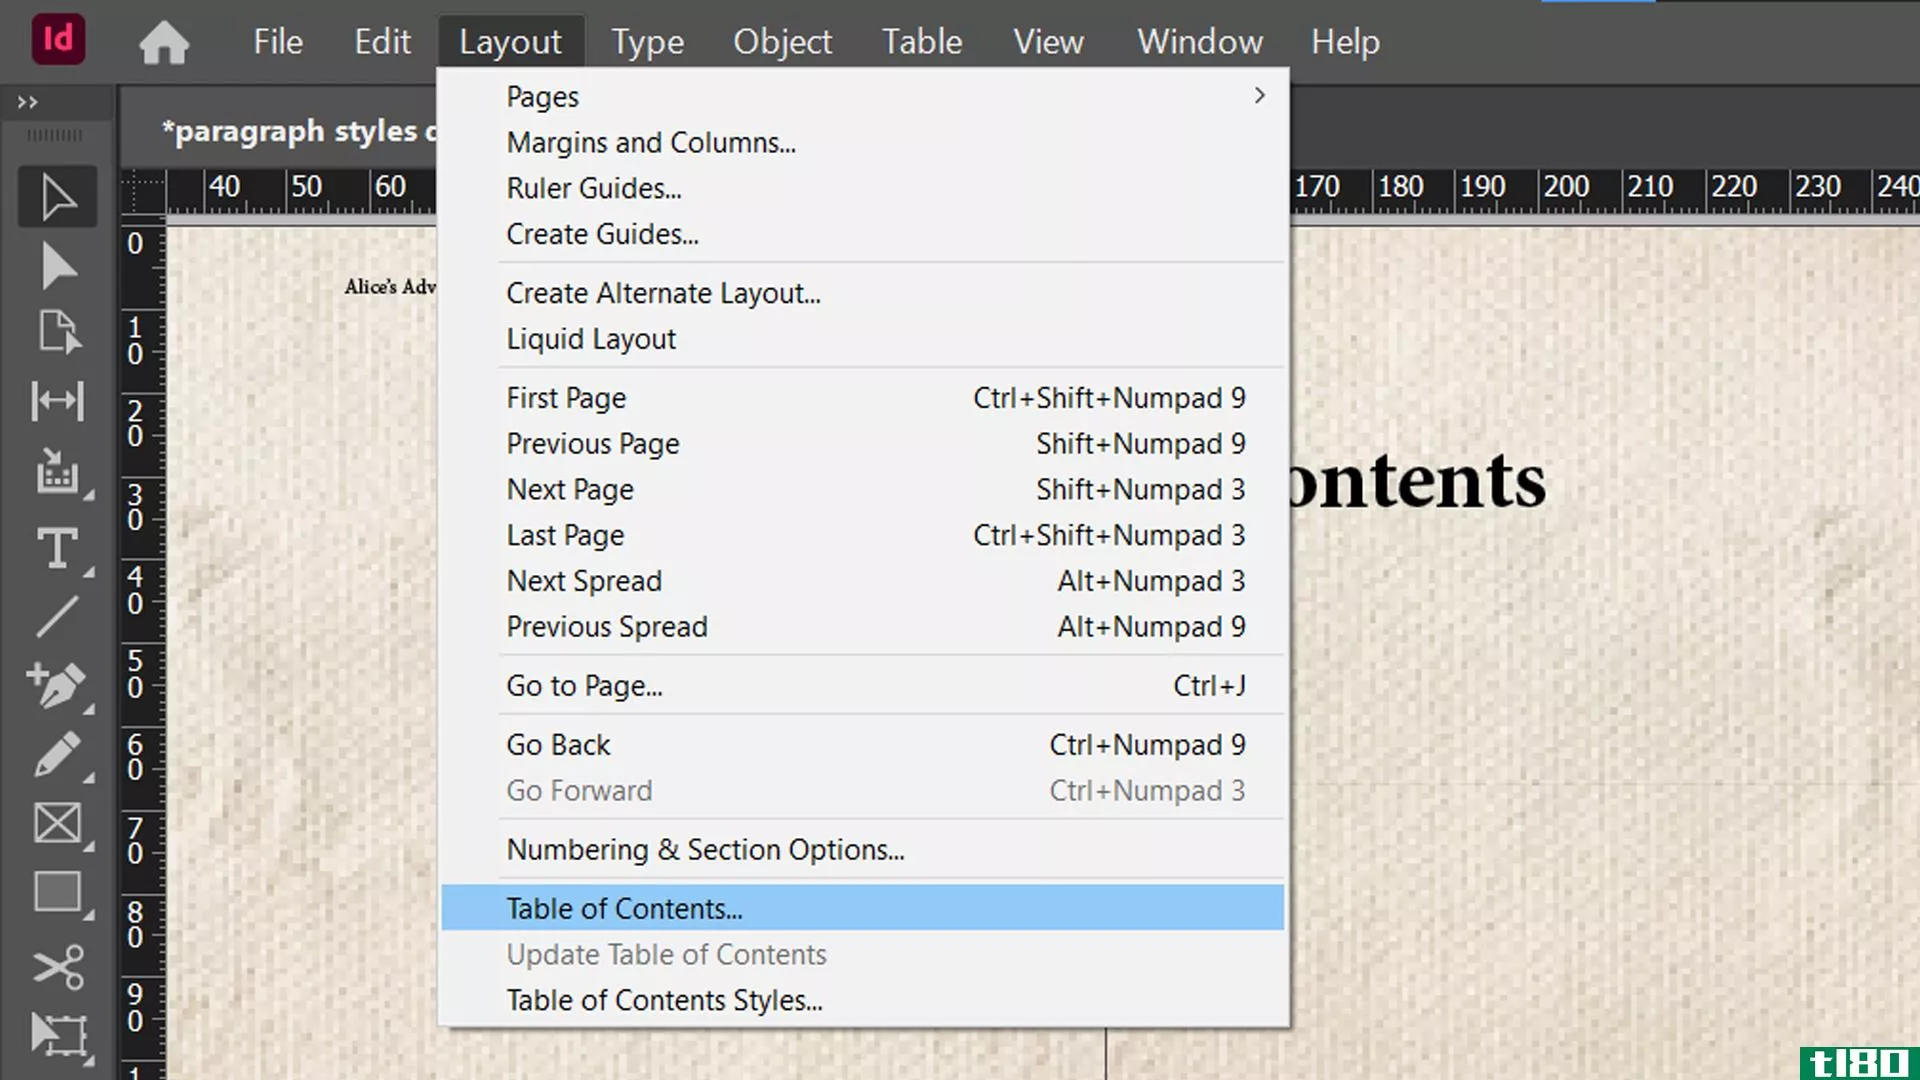 indesign contents page - add table of contents